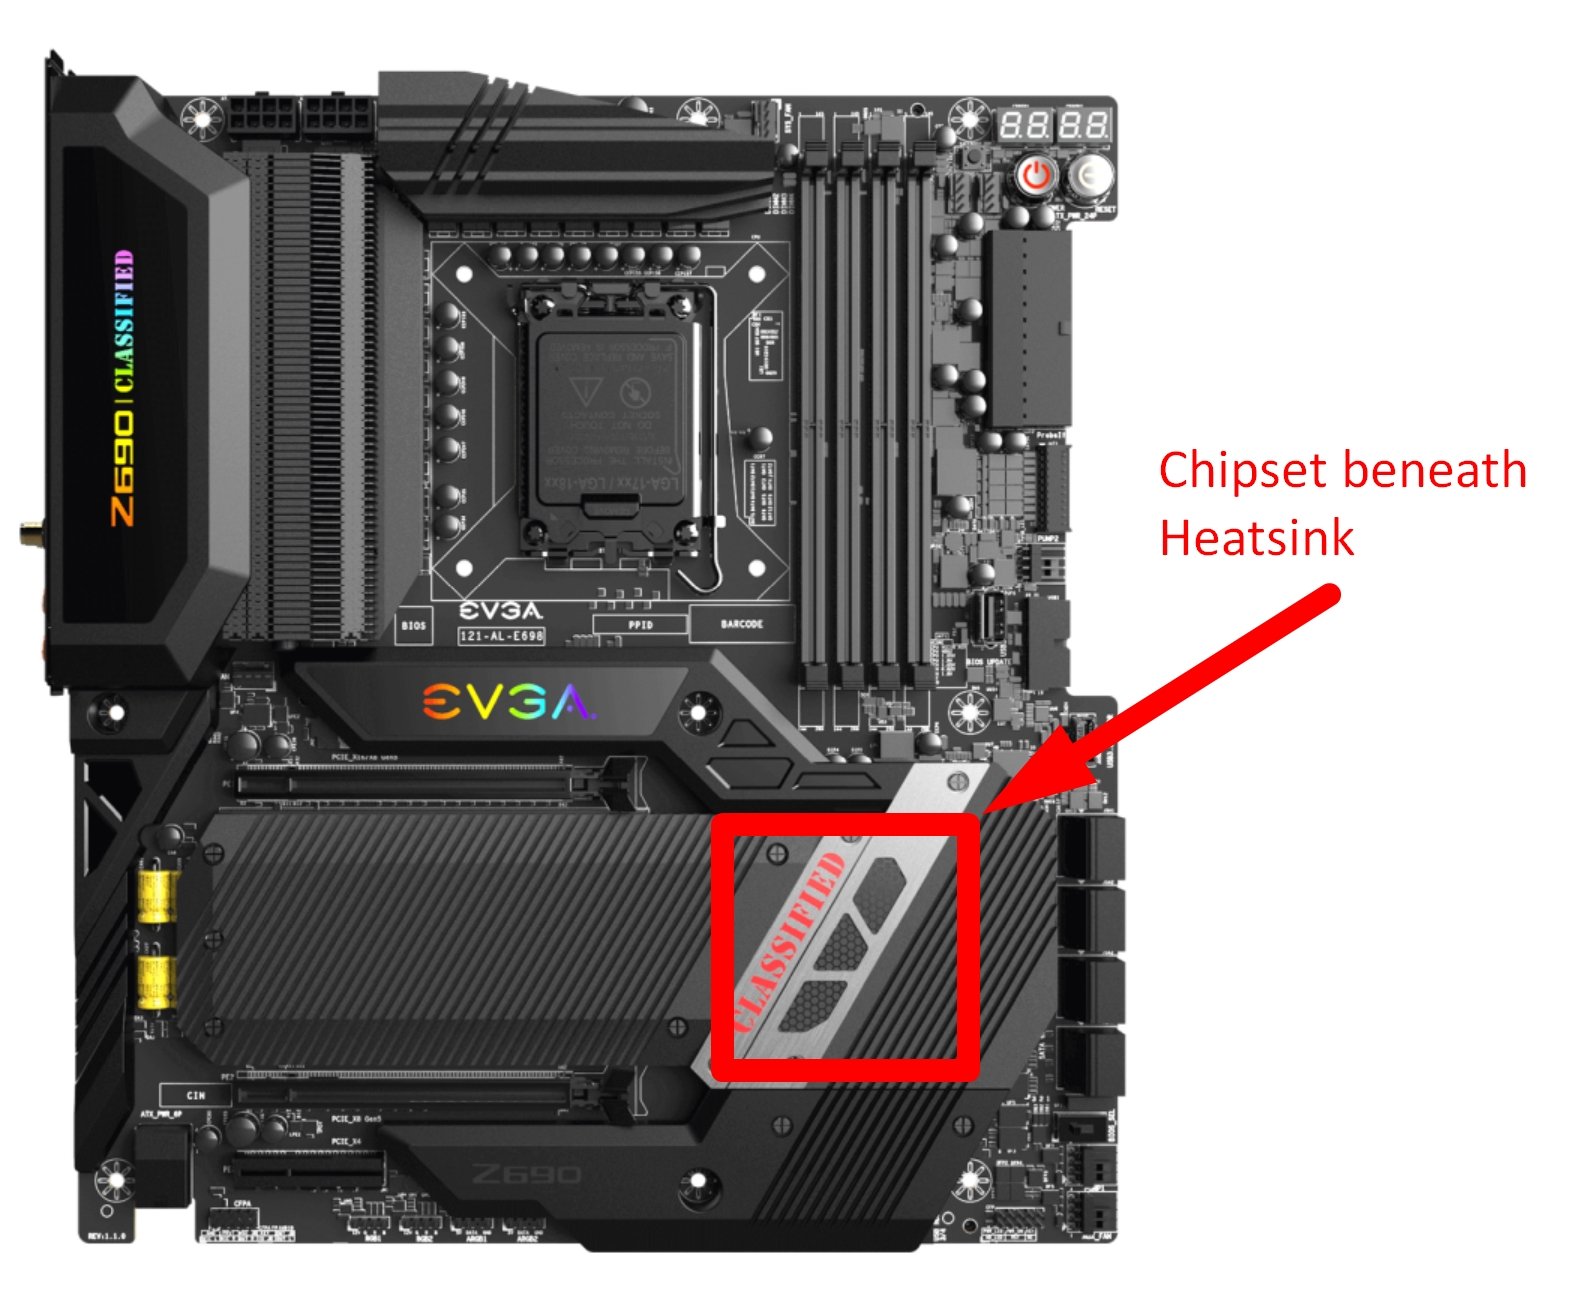 Chipset Position on Motherboard